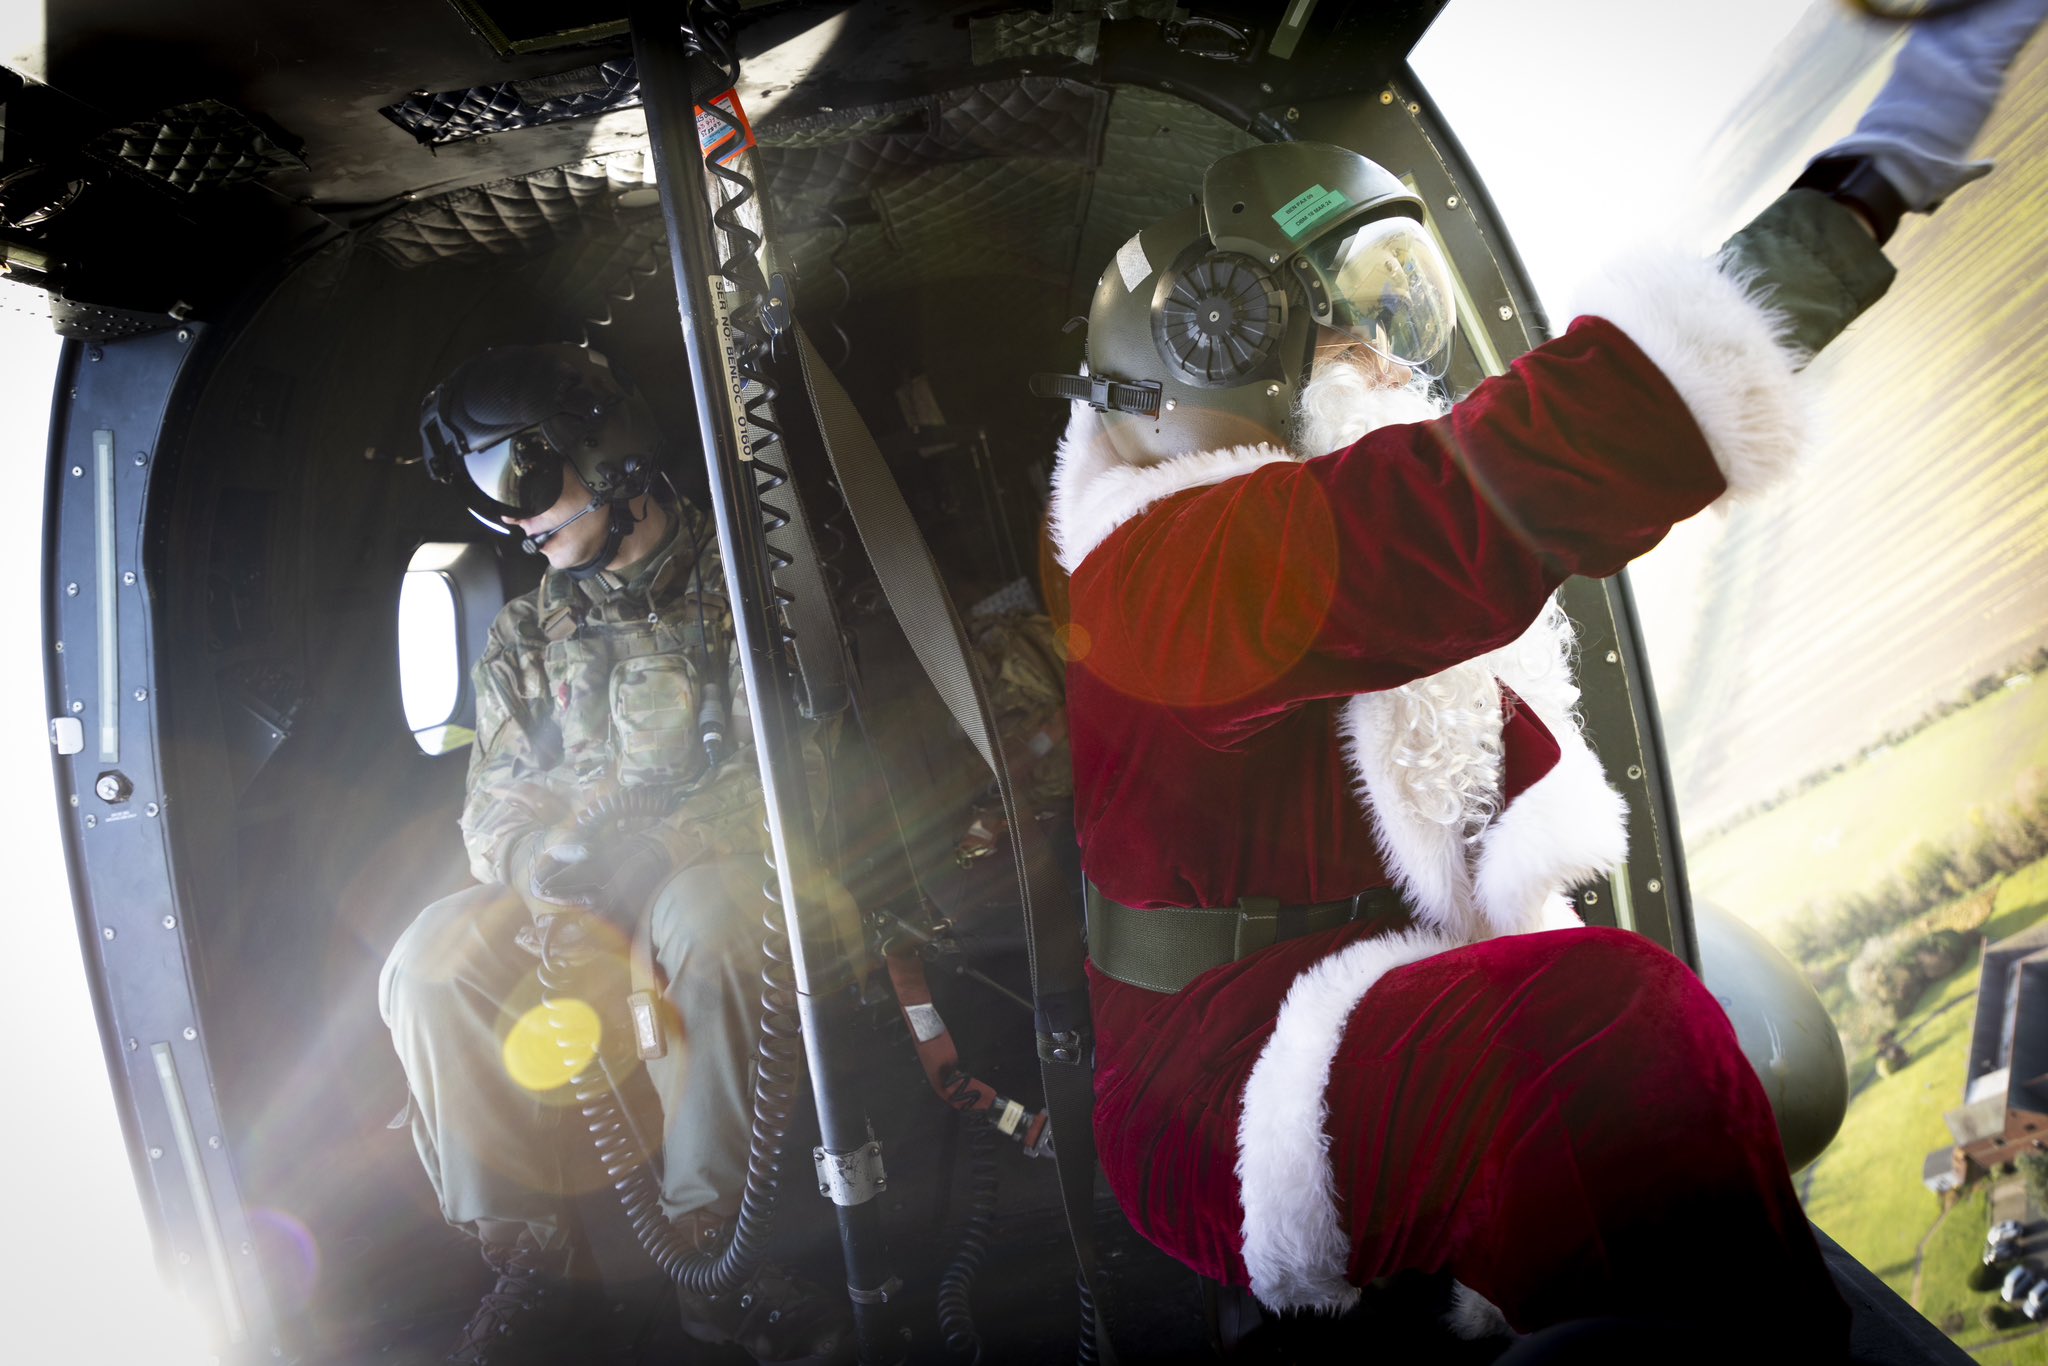 Santa waving at a town from inside a helicopter